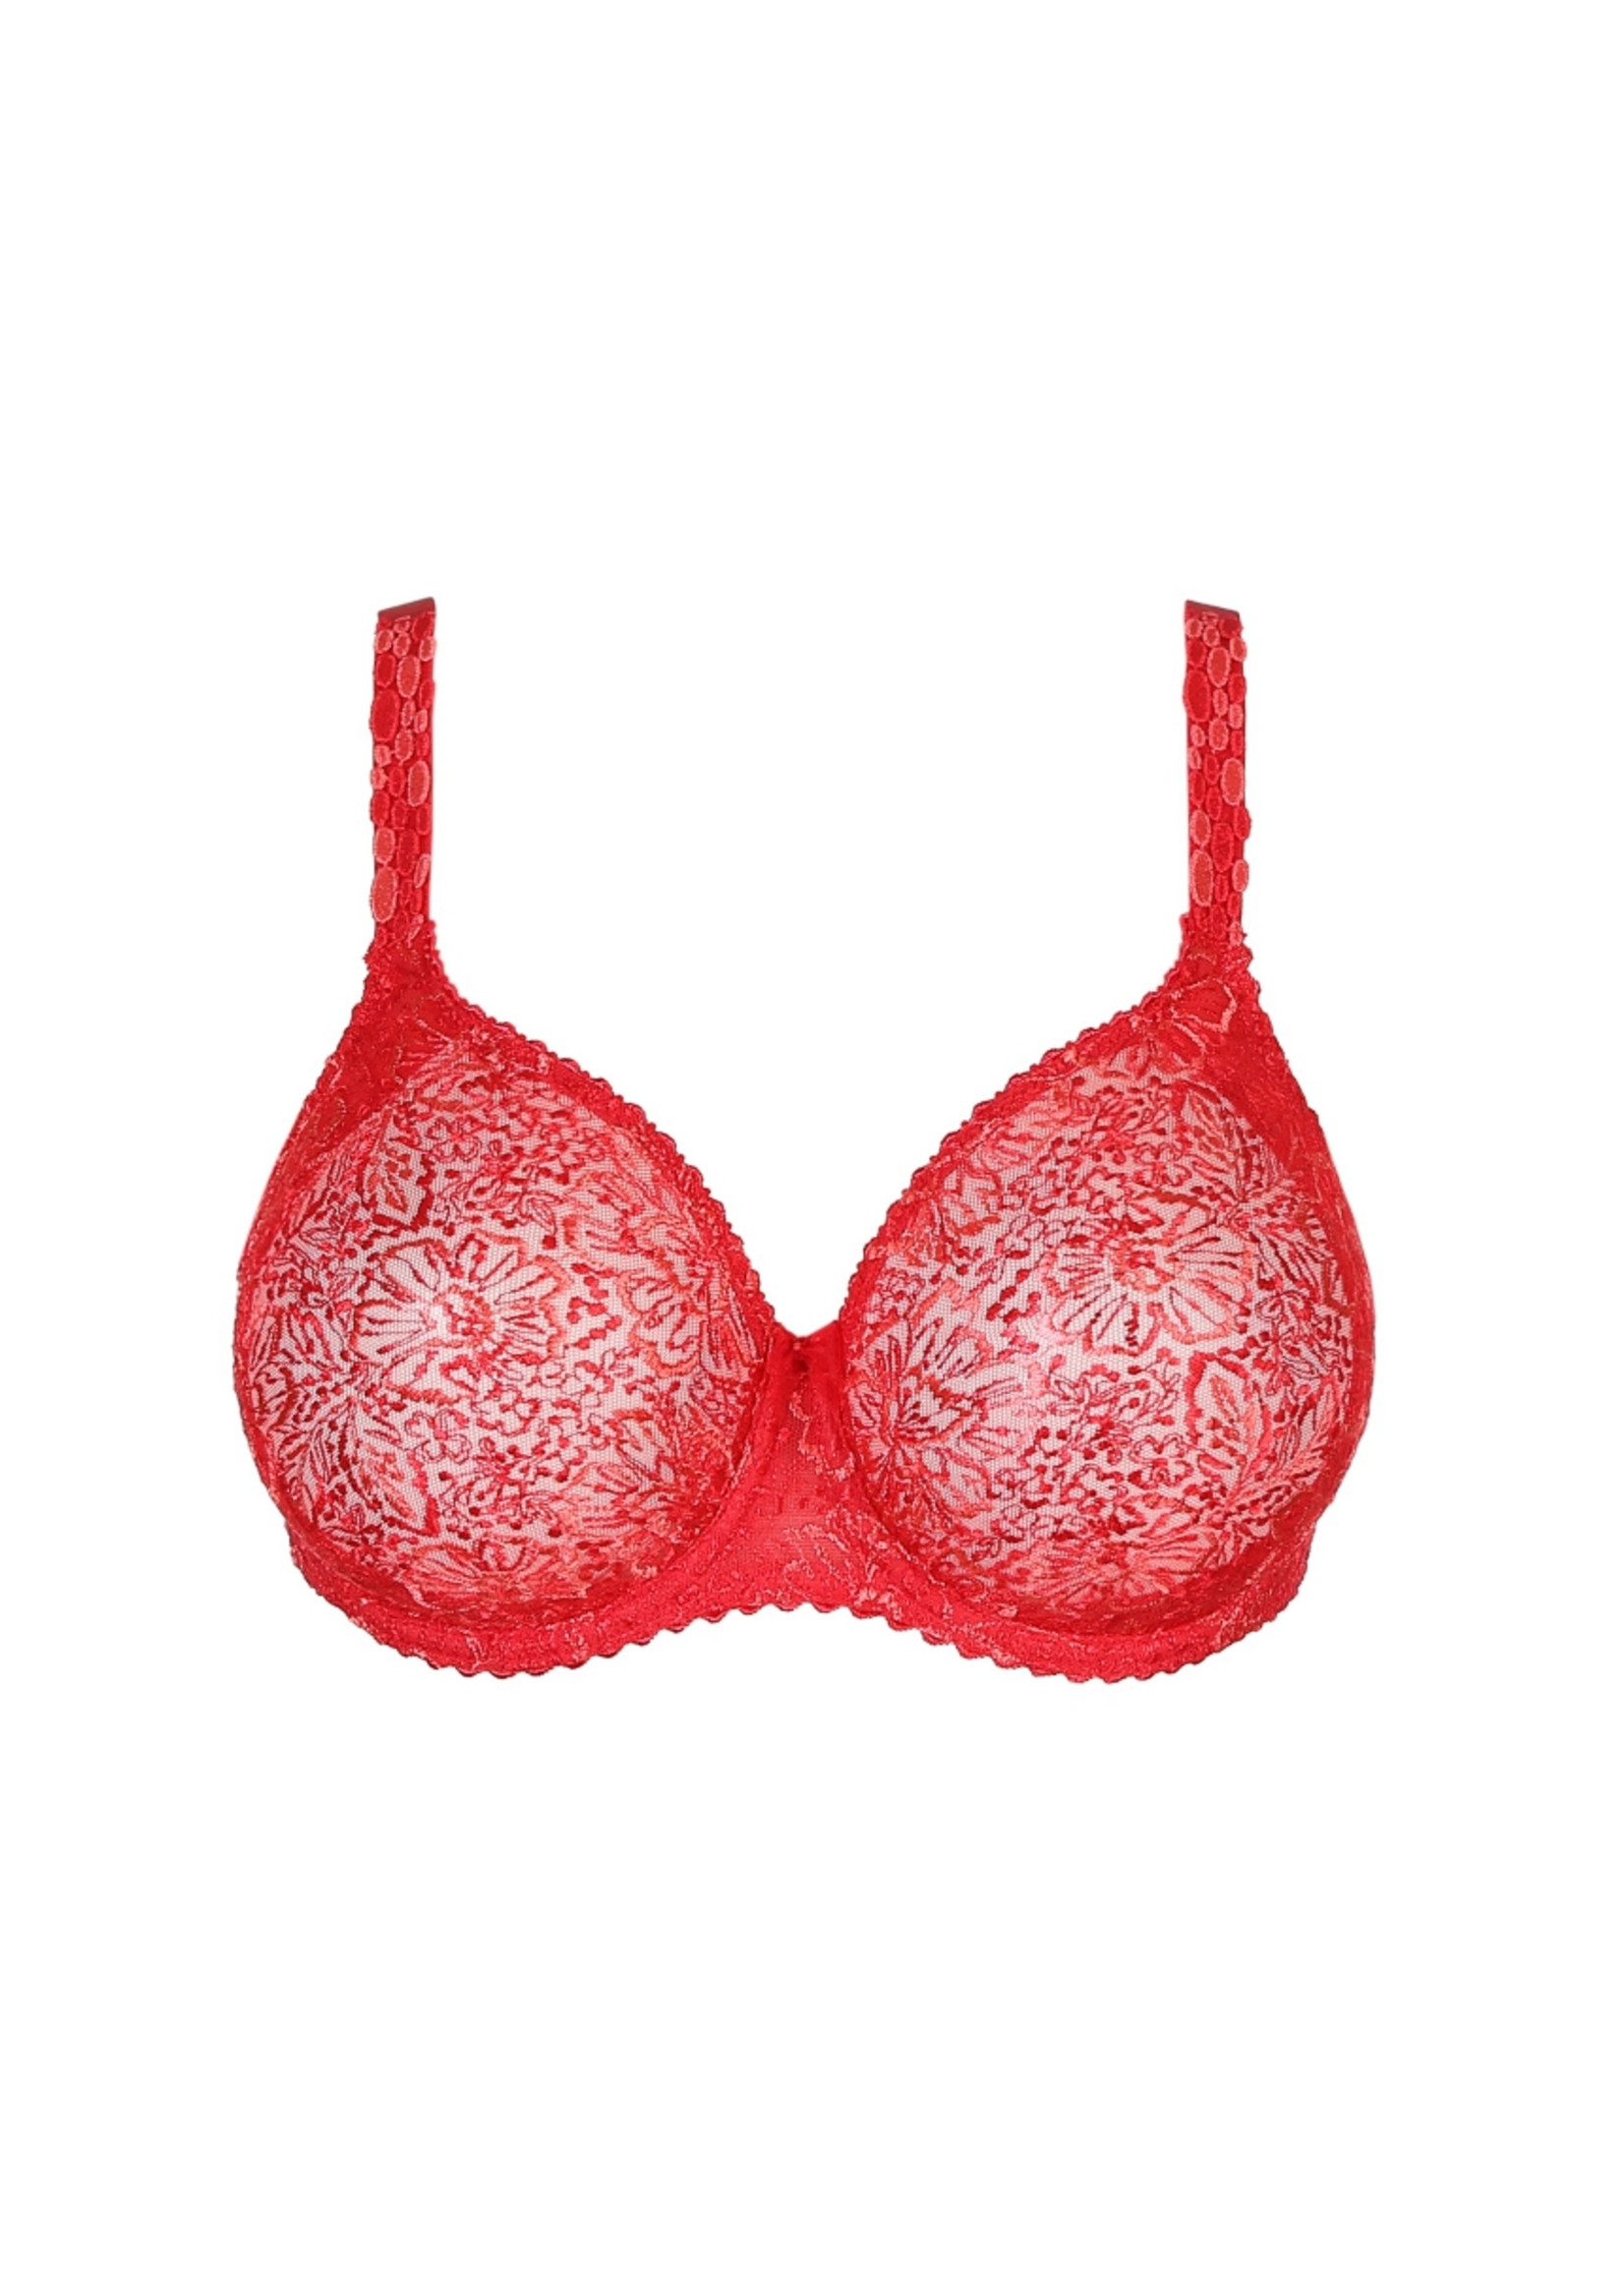 46D 5207-4-015 Women's Bordeaux Red Solid Colour Embroidered Underwired  Full Cup Bra 